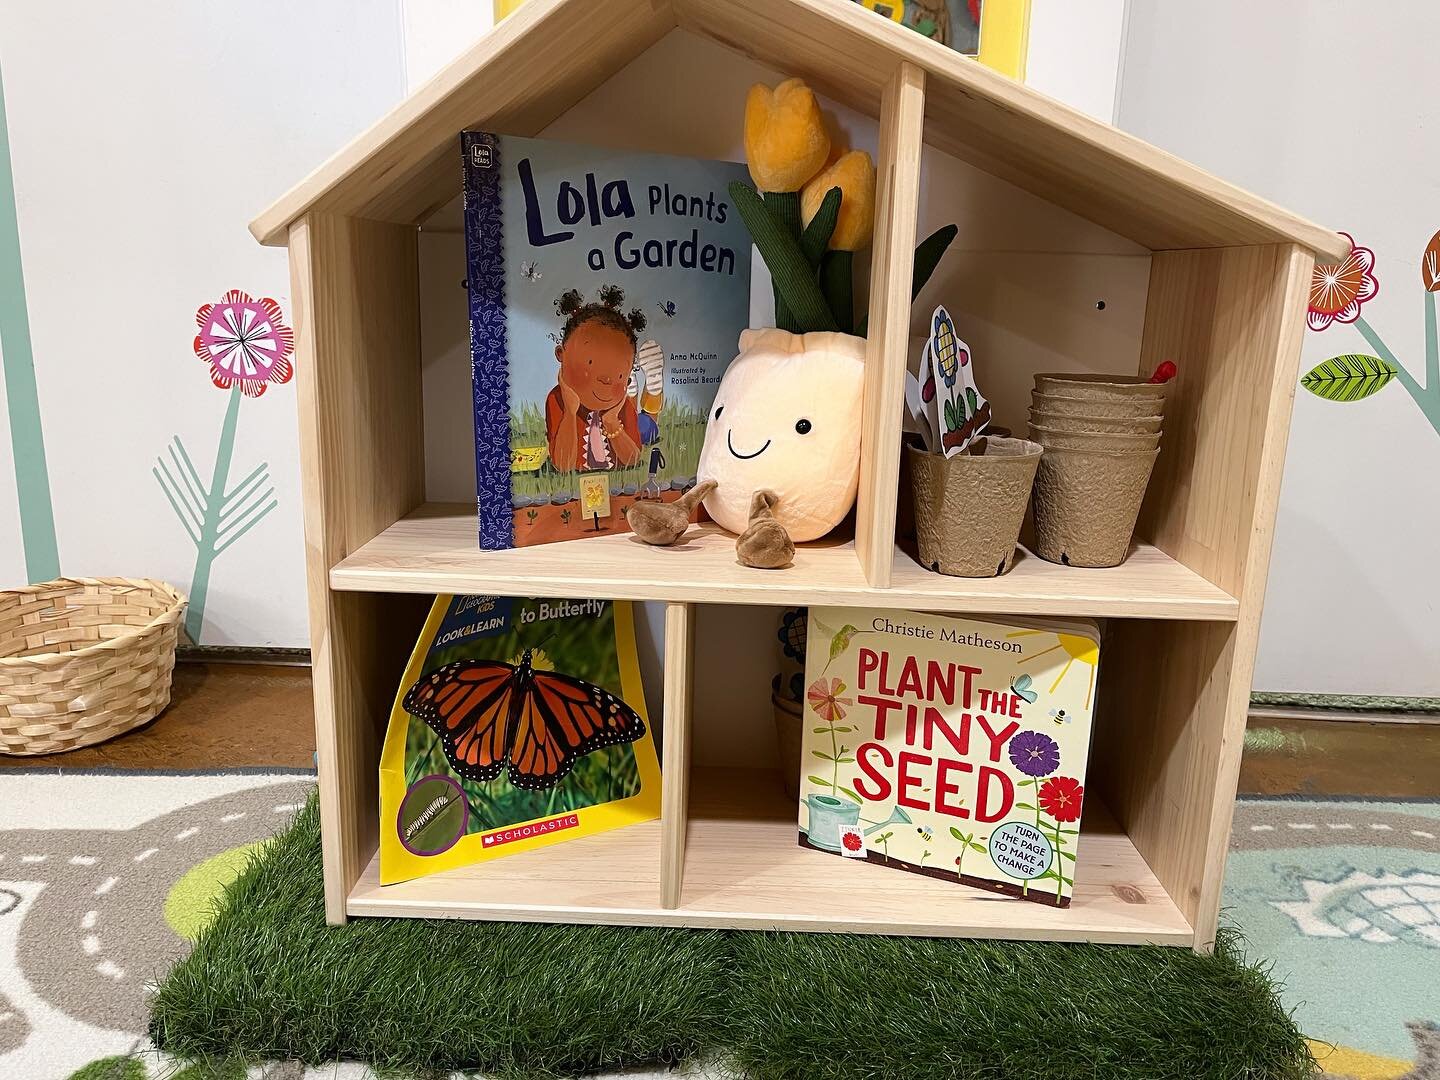 We are exciting to start our next unit:
 🌱GARDENING 🌱 
We&rsquo;ll be exploring the parts of a plant, life cycle, and characteristics of plants, along with what plants need to grow. Get ready for more fun activities! 

#tigerlilypreschool #halfdayp